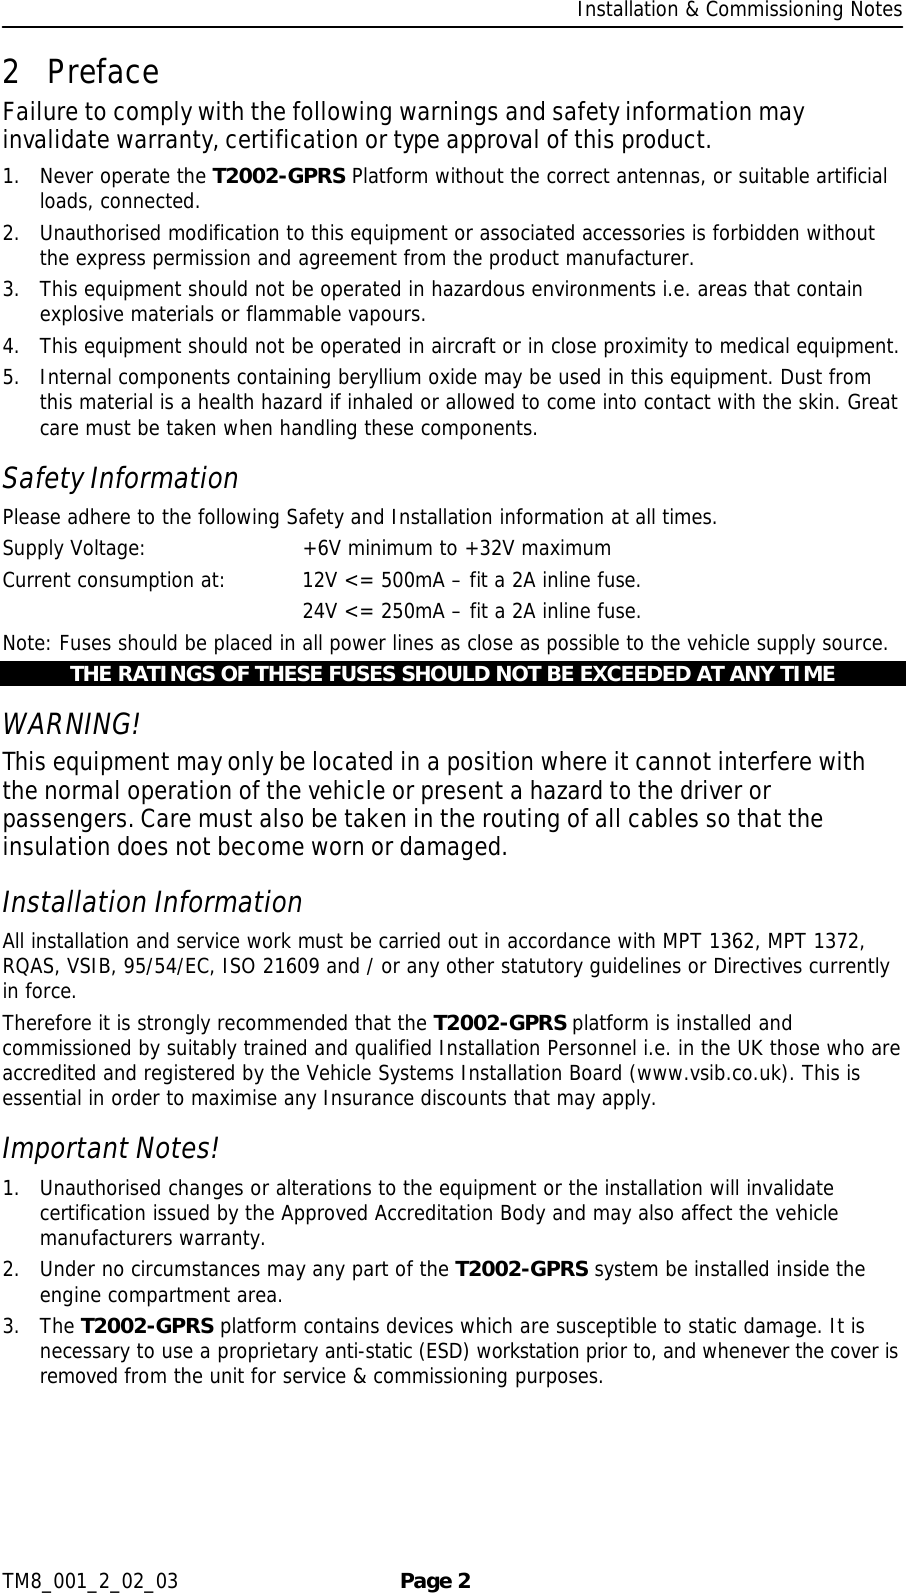     Installation &amp; Commissioning Notes TM8_001_2_02_03  Page 2 2 Preface Failure to comply with the following warnings and safety information may invalidate warranty, certification or type approval of this product. 1. Never operate the T2002-GPRS Platform without the correct antennas, or suitable artificial loads, connected. 2. Unauthorised modification to this equipment or associated accessories is forbidden without the express permission and agreement from the product manufacturer. 3. This equipment should not be operated in hazardous environments i.e. areas that contain explosive materials or flammable vapours. 4. This equipment should not be operated in aircraft or in close proximity to medical equipment. 5. Internal components containing beryllium oxide may be used in this equipment. Dust from this material is a health hazard if inhaled or allowed to come into contact with the skin. Great care must be taken when handling these components.  Safety Information Please adhere to the following Safety and Installation information at all times. Supply Voltage:     +6V minimum to +32V maximum Current consumption at:   12V &lt;= 500mA – fit a 2A inline fuse.         24V &lt;= 250mA – fit a 2A inline fuse. Note: Fuses should be placed in all power lines as close as possible to the vehicle supply source. THE RATINGS OF THESE FUSES SHOULD NOT BE EXCEEDED AT ANY TIME WARNING! This equipment may only be located in a position where it cannot interfere with the normal operation of the vehicle or present a hazard to the driver or passengers. Care must also be taken in the routing of all cables so that the insulation does not become worn or damaged. Installation Information All installation and service work must be carried out in accordance with MPT 1362, MPT 1372, RQAS, VSIB, 95/54/EC, ISO 21609 and / or any other statutory guidelines or Directives currently in force. Therefore it is strongly recommended that the T2002-GPRS platform is installed and commissioned by suitably trained and qualified Installation Personnel i.e. in the UK those who are accredited and registered by the Vehicle Systems Installation Board (www.vsib.co.uk). This is essential in order to maximise any Insurance discounts that may apply. Important Notes! 1. Unauthorised changes or alterations to the equipment or the installation will invalidate certification issued by the Approved Accreditation Body and may also affect the vehicle manufacturers warranty. 2. Under no circumstances may any part of the T2002-GPRS system be installed inside the engine compartment area. 3. The T2002-GPRS platform contains devices which are susceptible to static damage. It is necessary to use a proprietary anti-static (ESD) workstation prior to, and whenever the cover is removed from the unit for service &amp; commissioning purposes. 